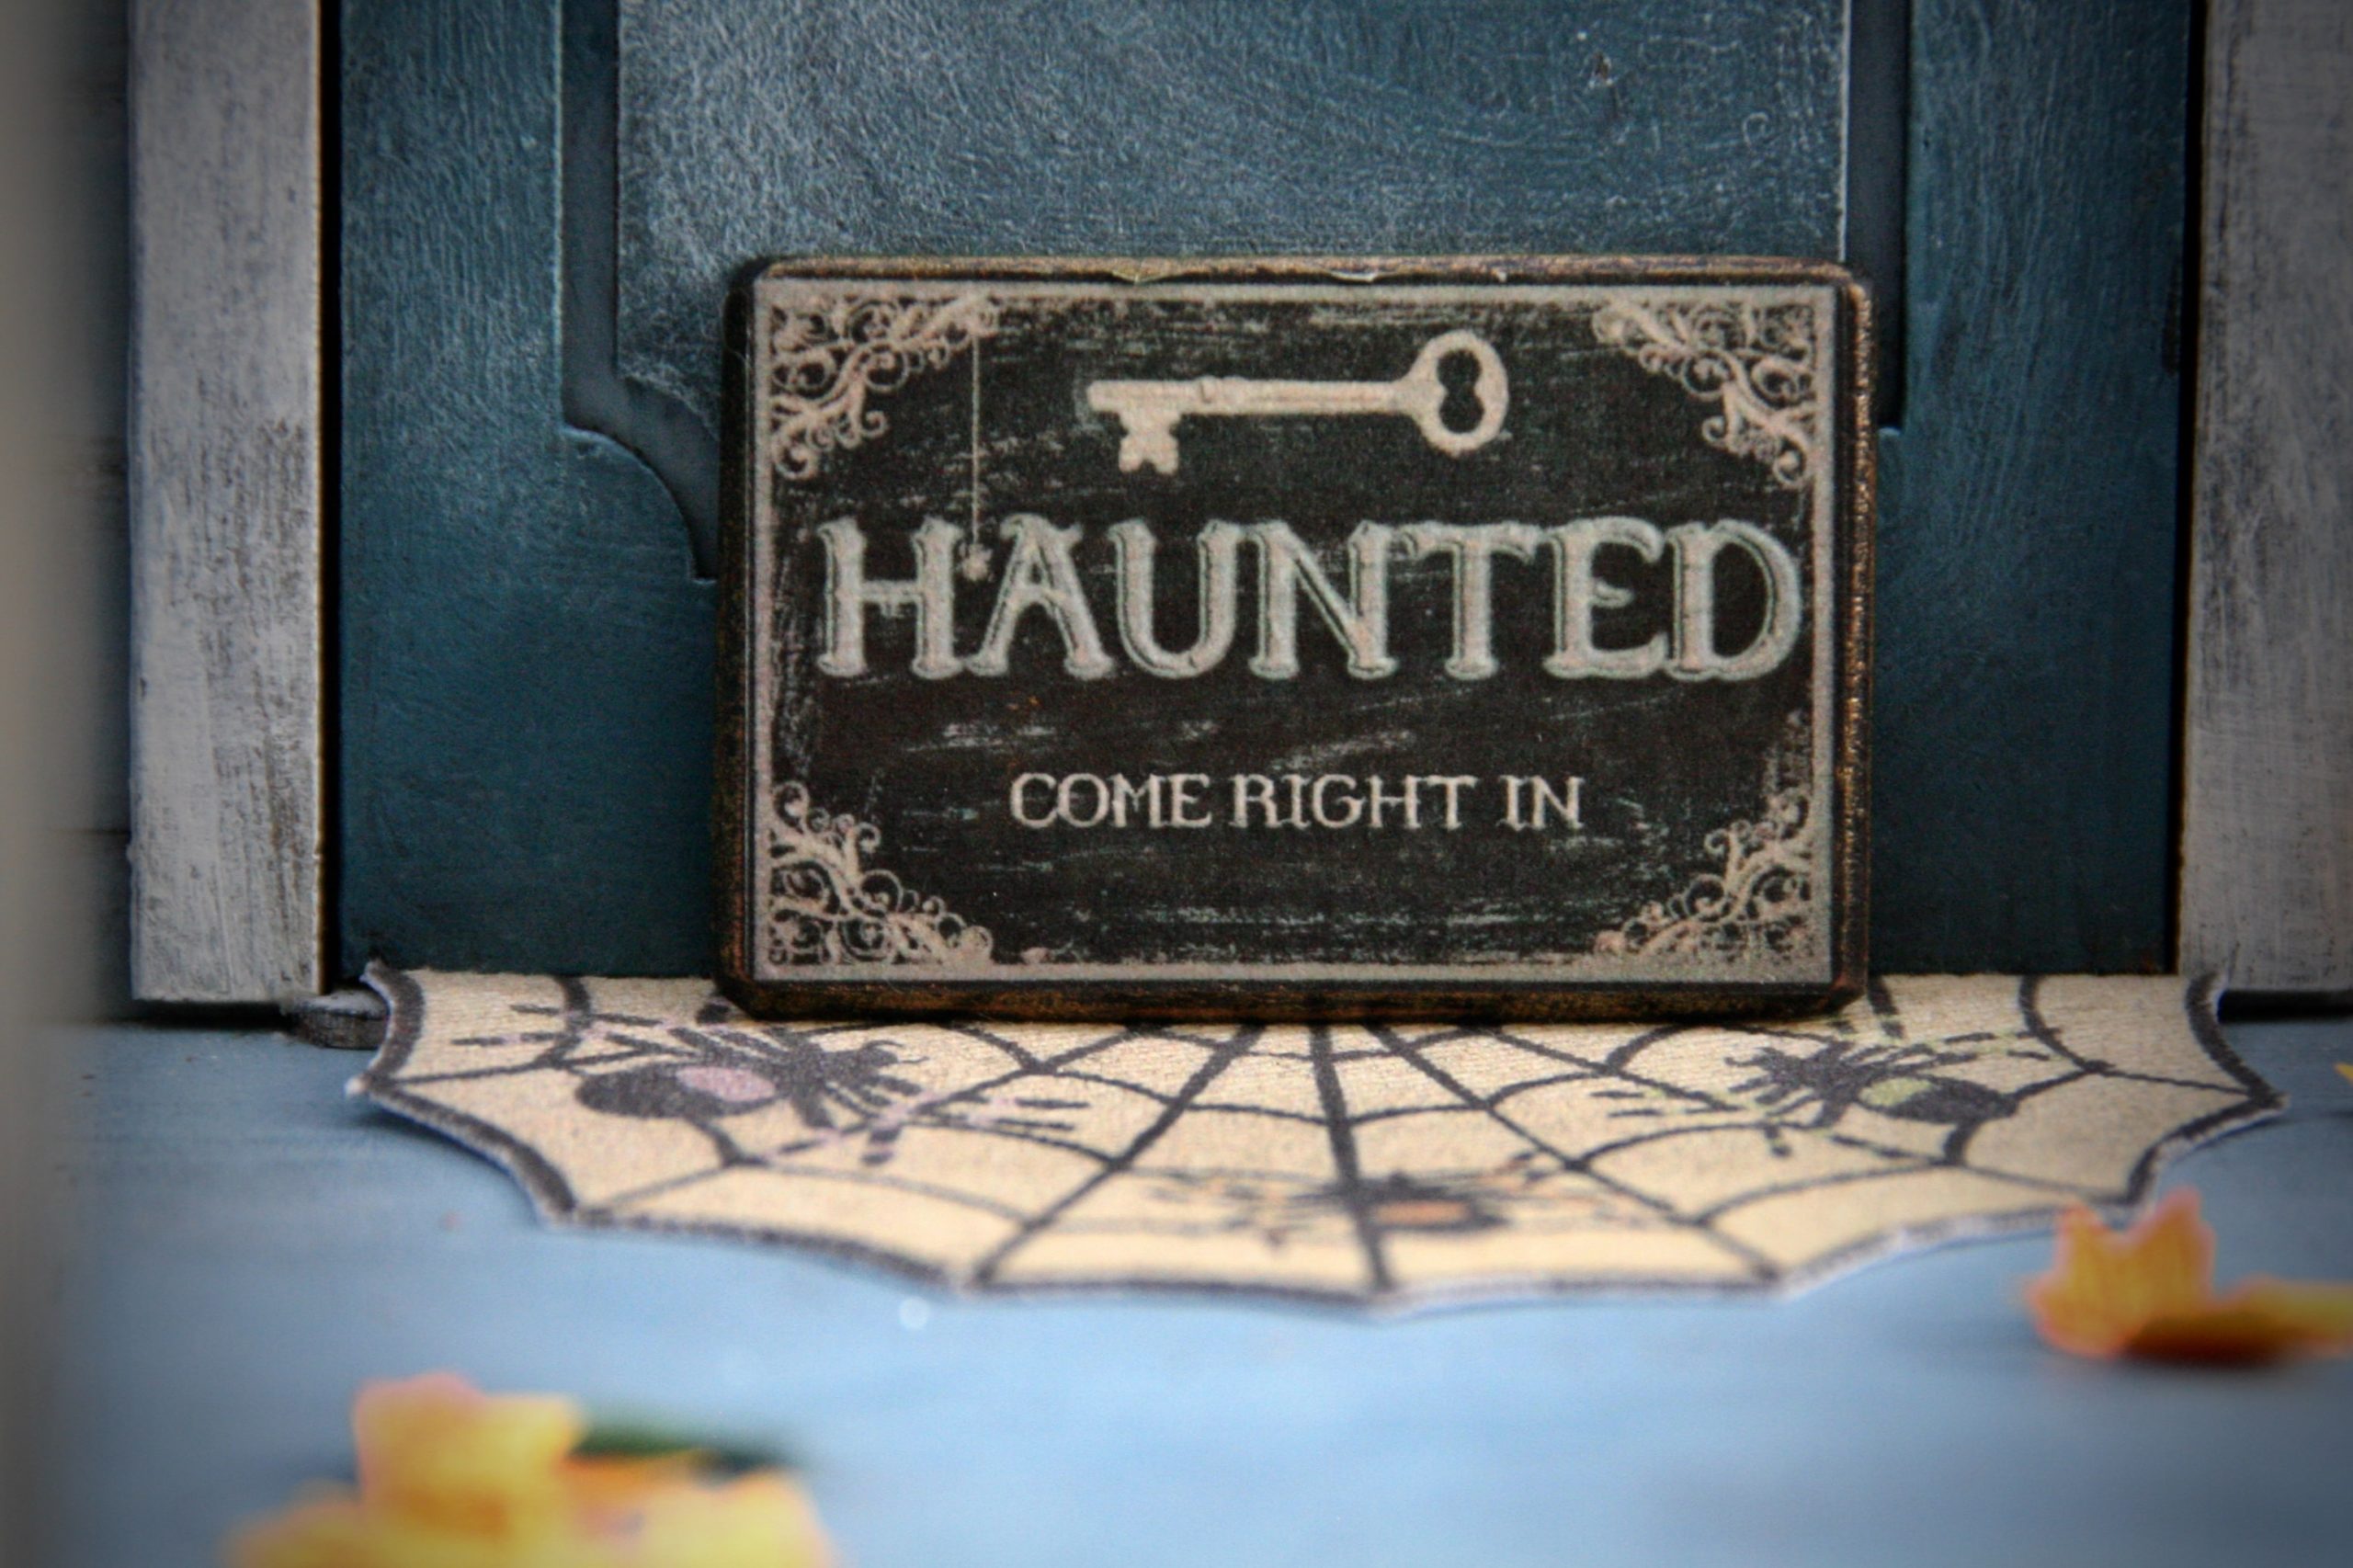 A sign resting against a door says "Haunted, Come Right In" and above the writing is an illustration of a key.